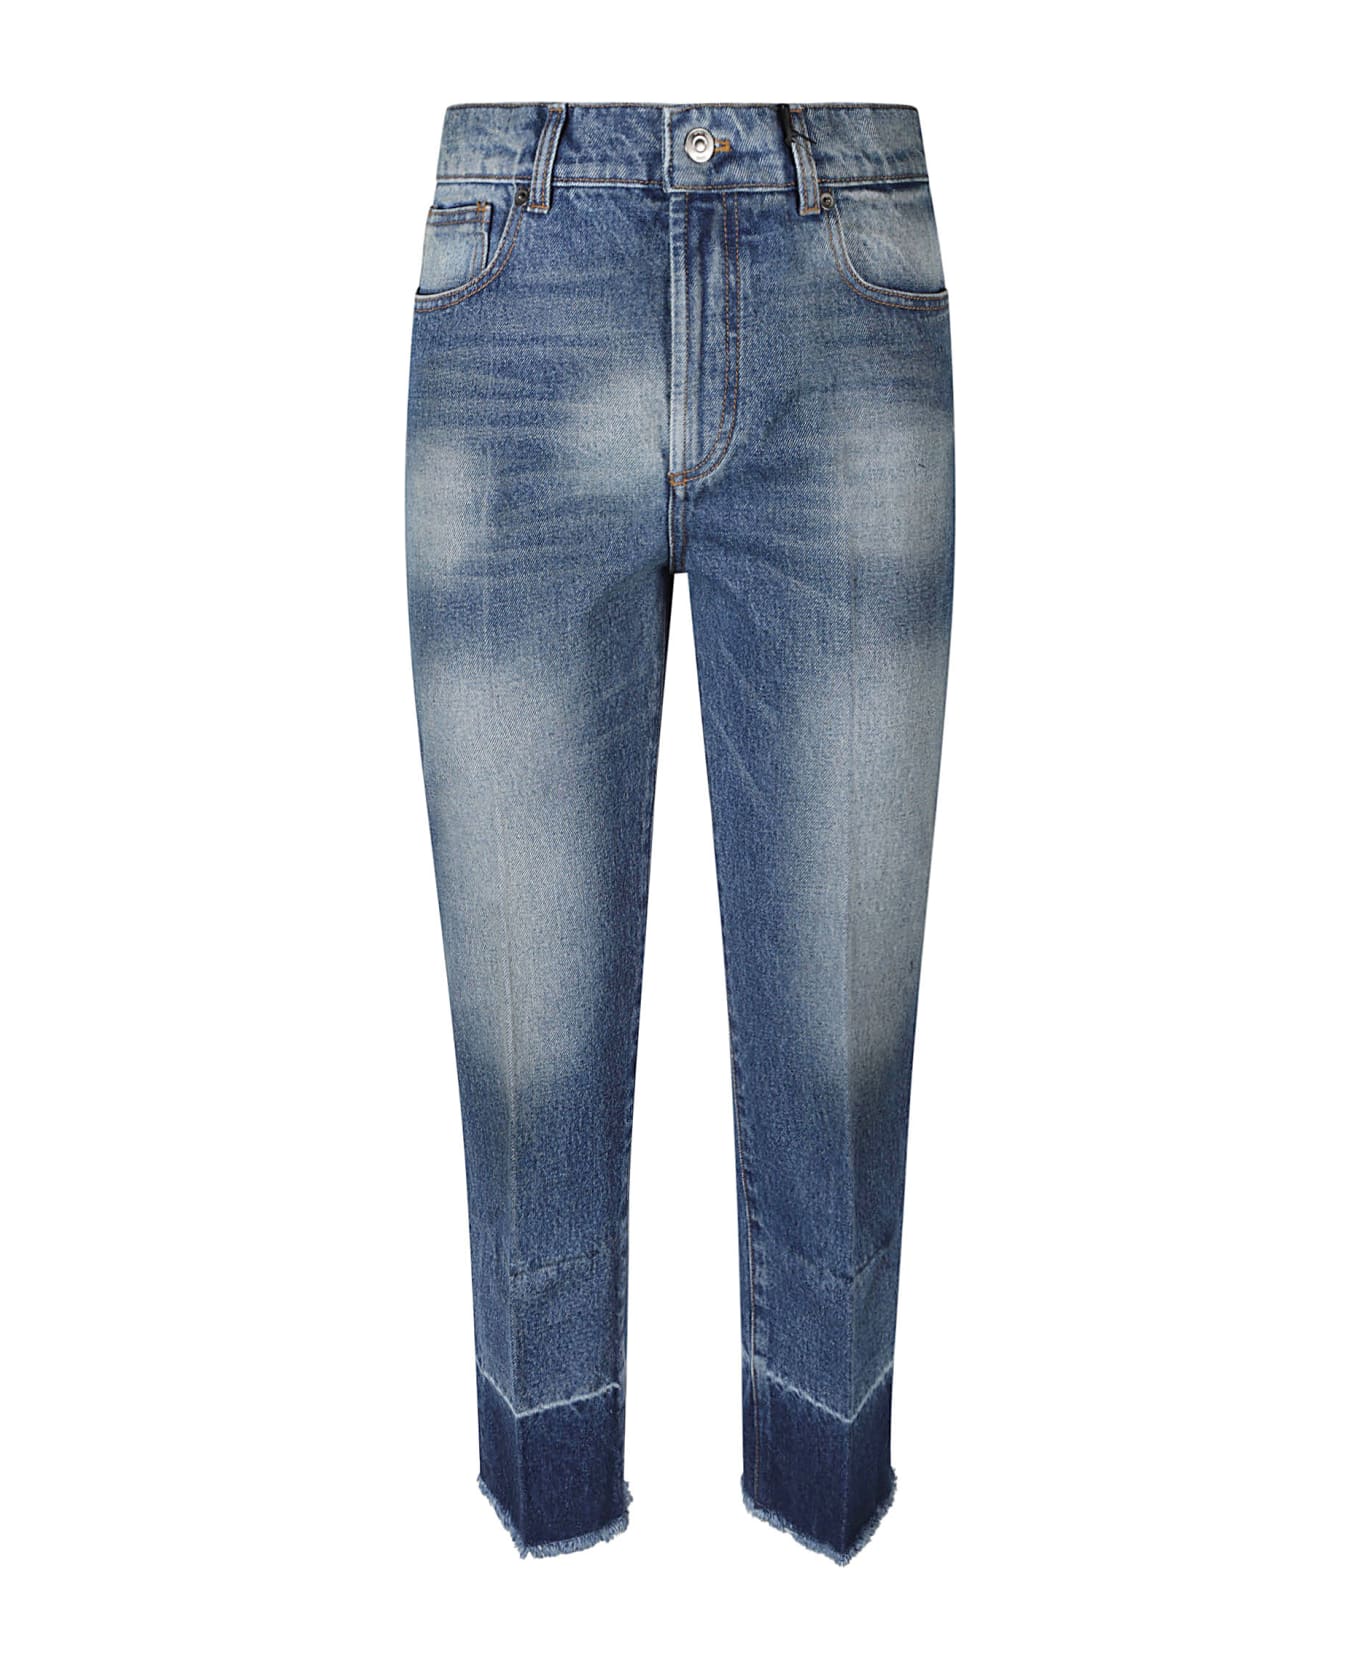 N.21 Straight Buttoned Jeans - Indigo